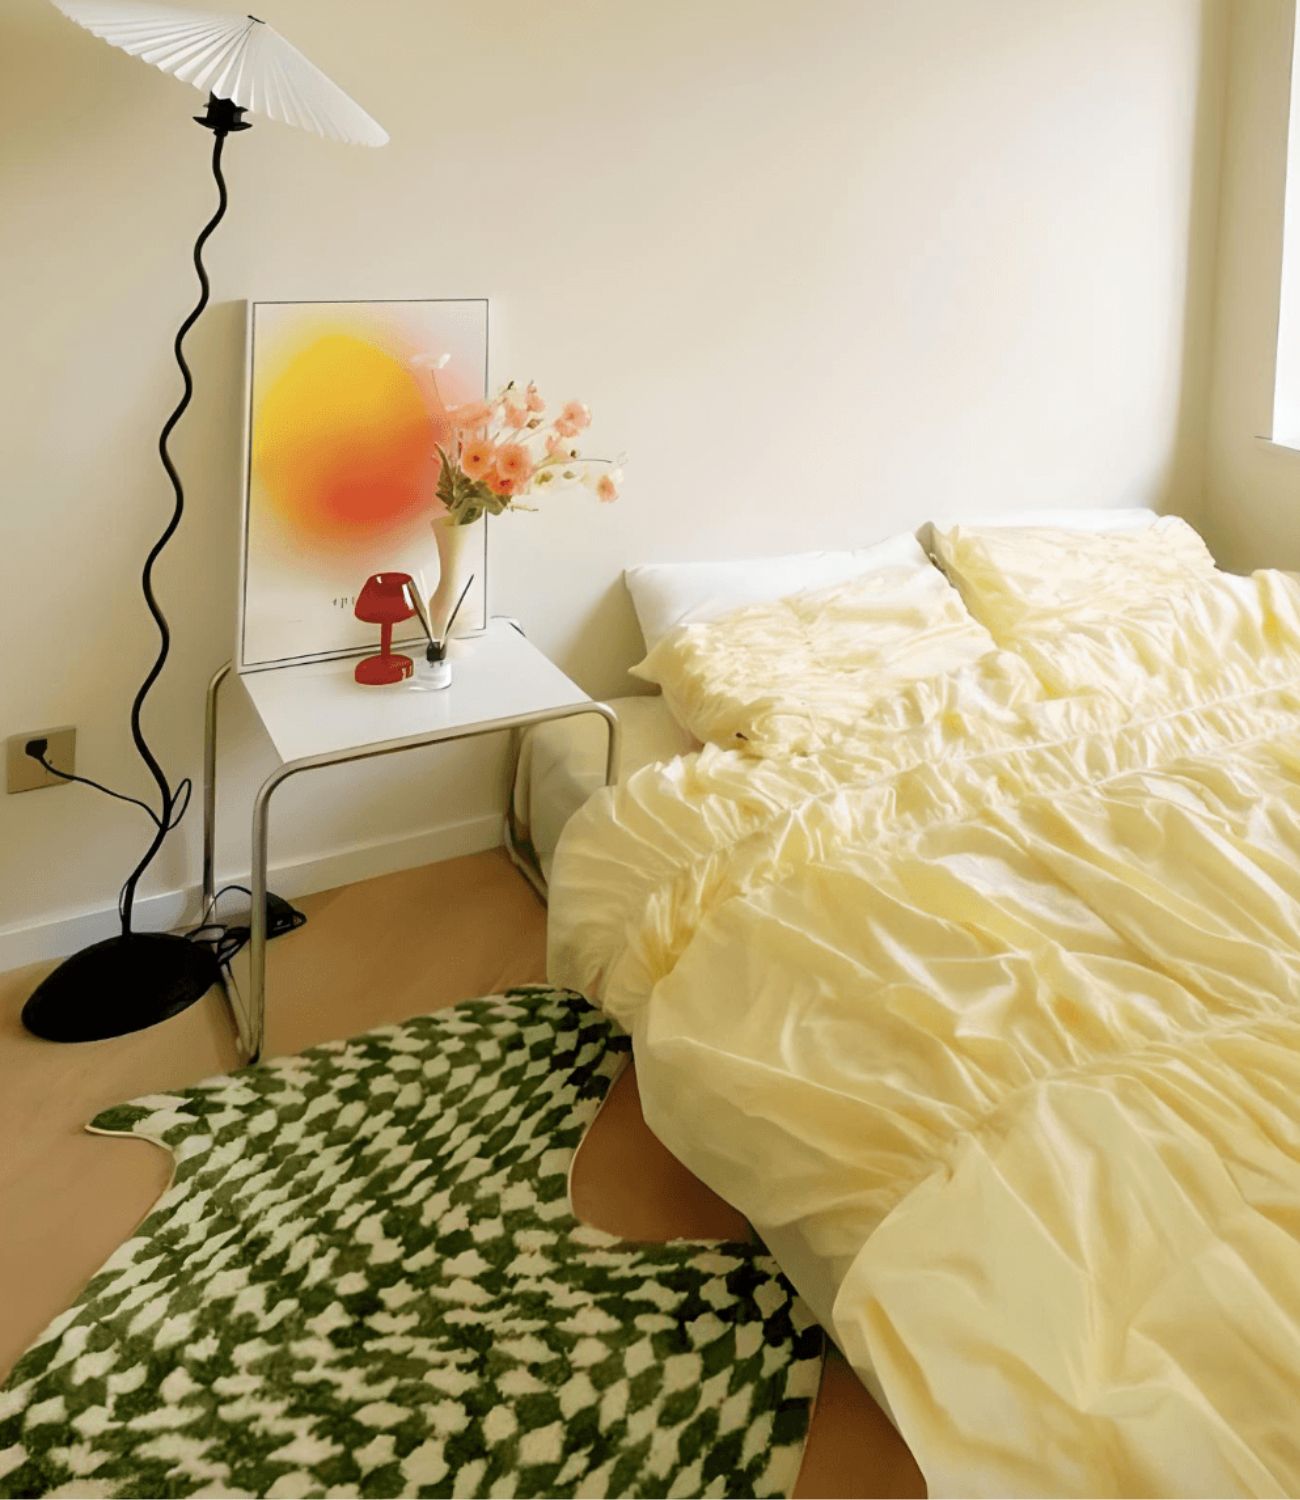 Funky bedroom decor wiggle stem lamp, yellow sheets and green white checkerboard floor rug.